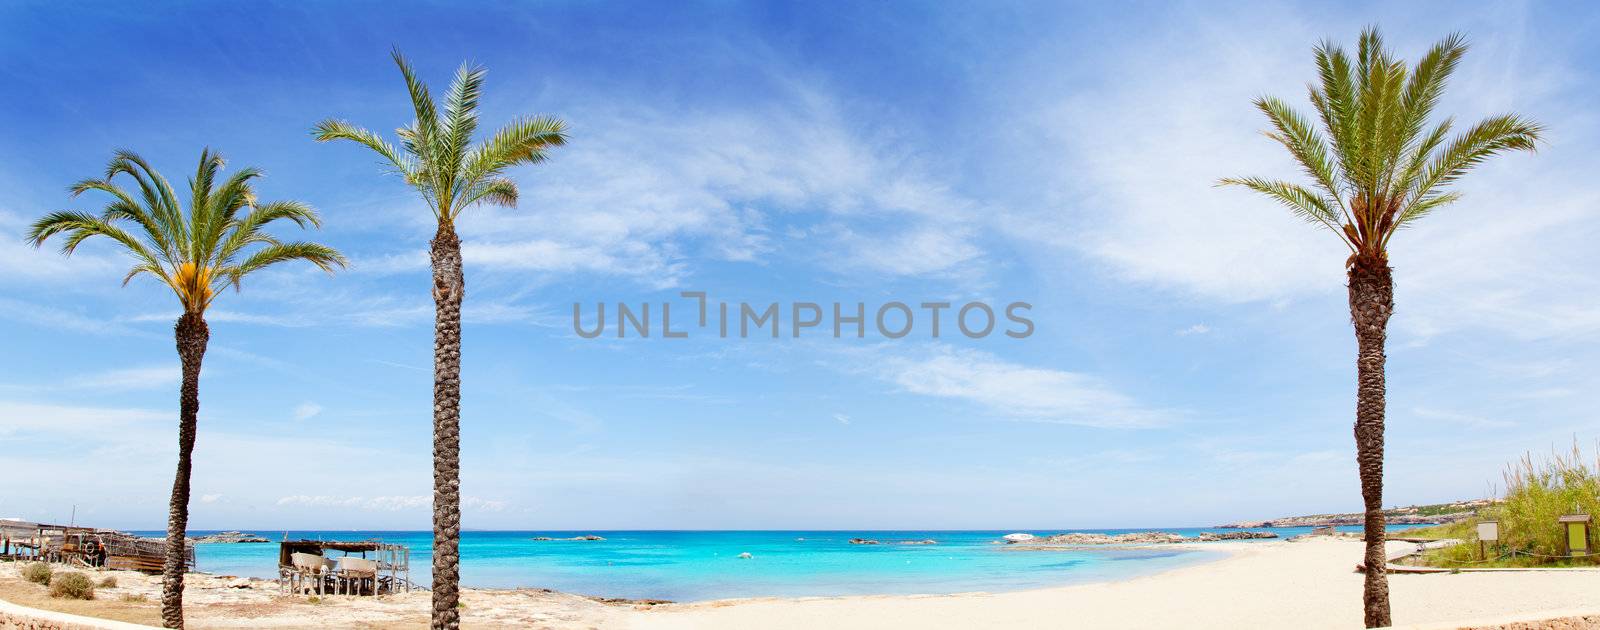 Els Pujols formentera beach with turquoise water by lunamarina